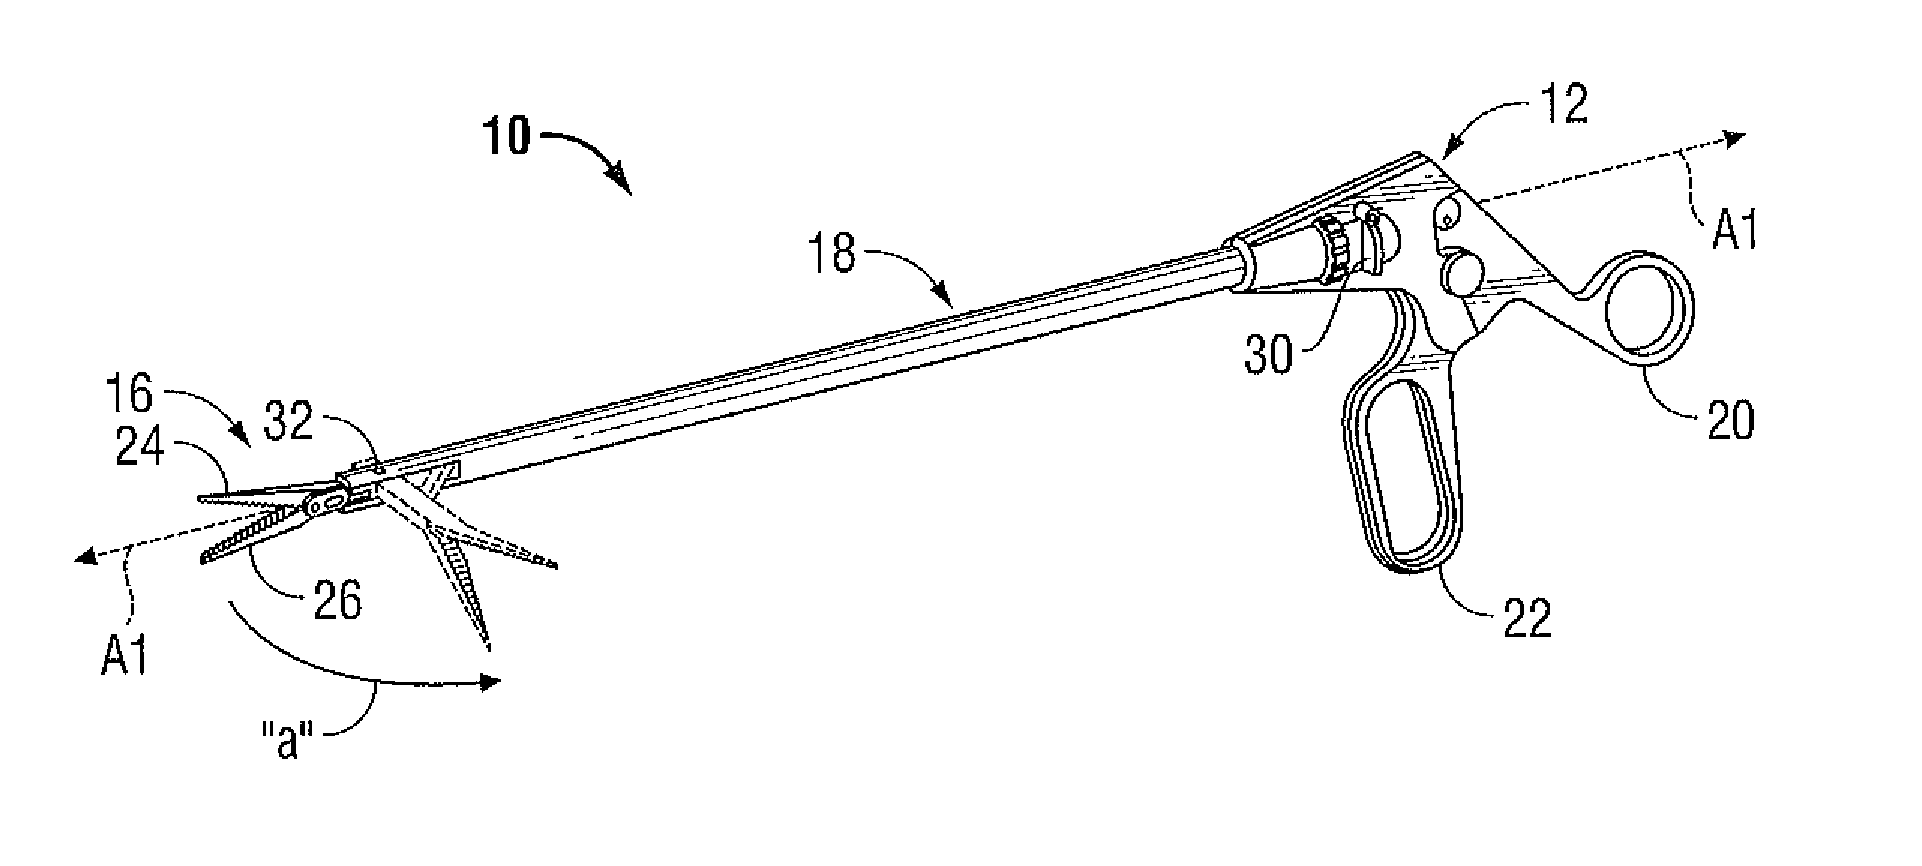 Method of Transferring Pressure in an Articulating Surgical Instrument